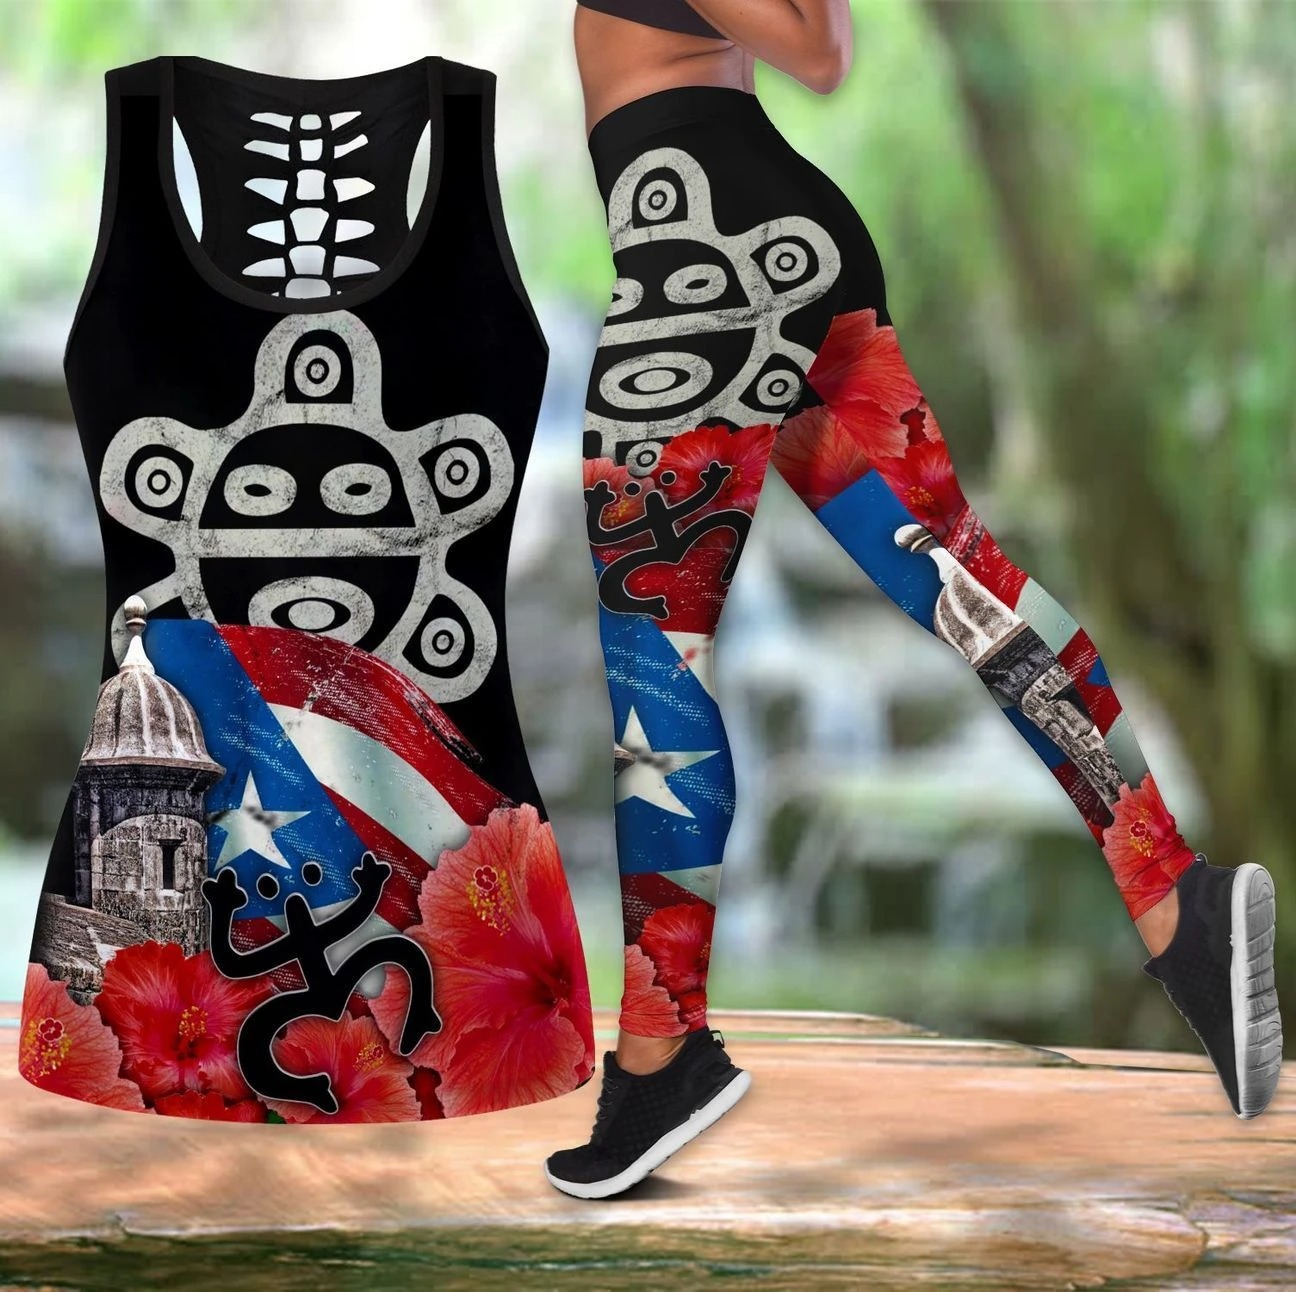 Puerto rice sol taino outfit legging and tank top